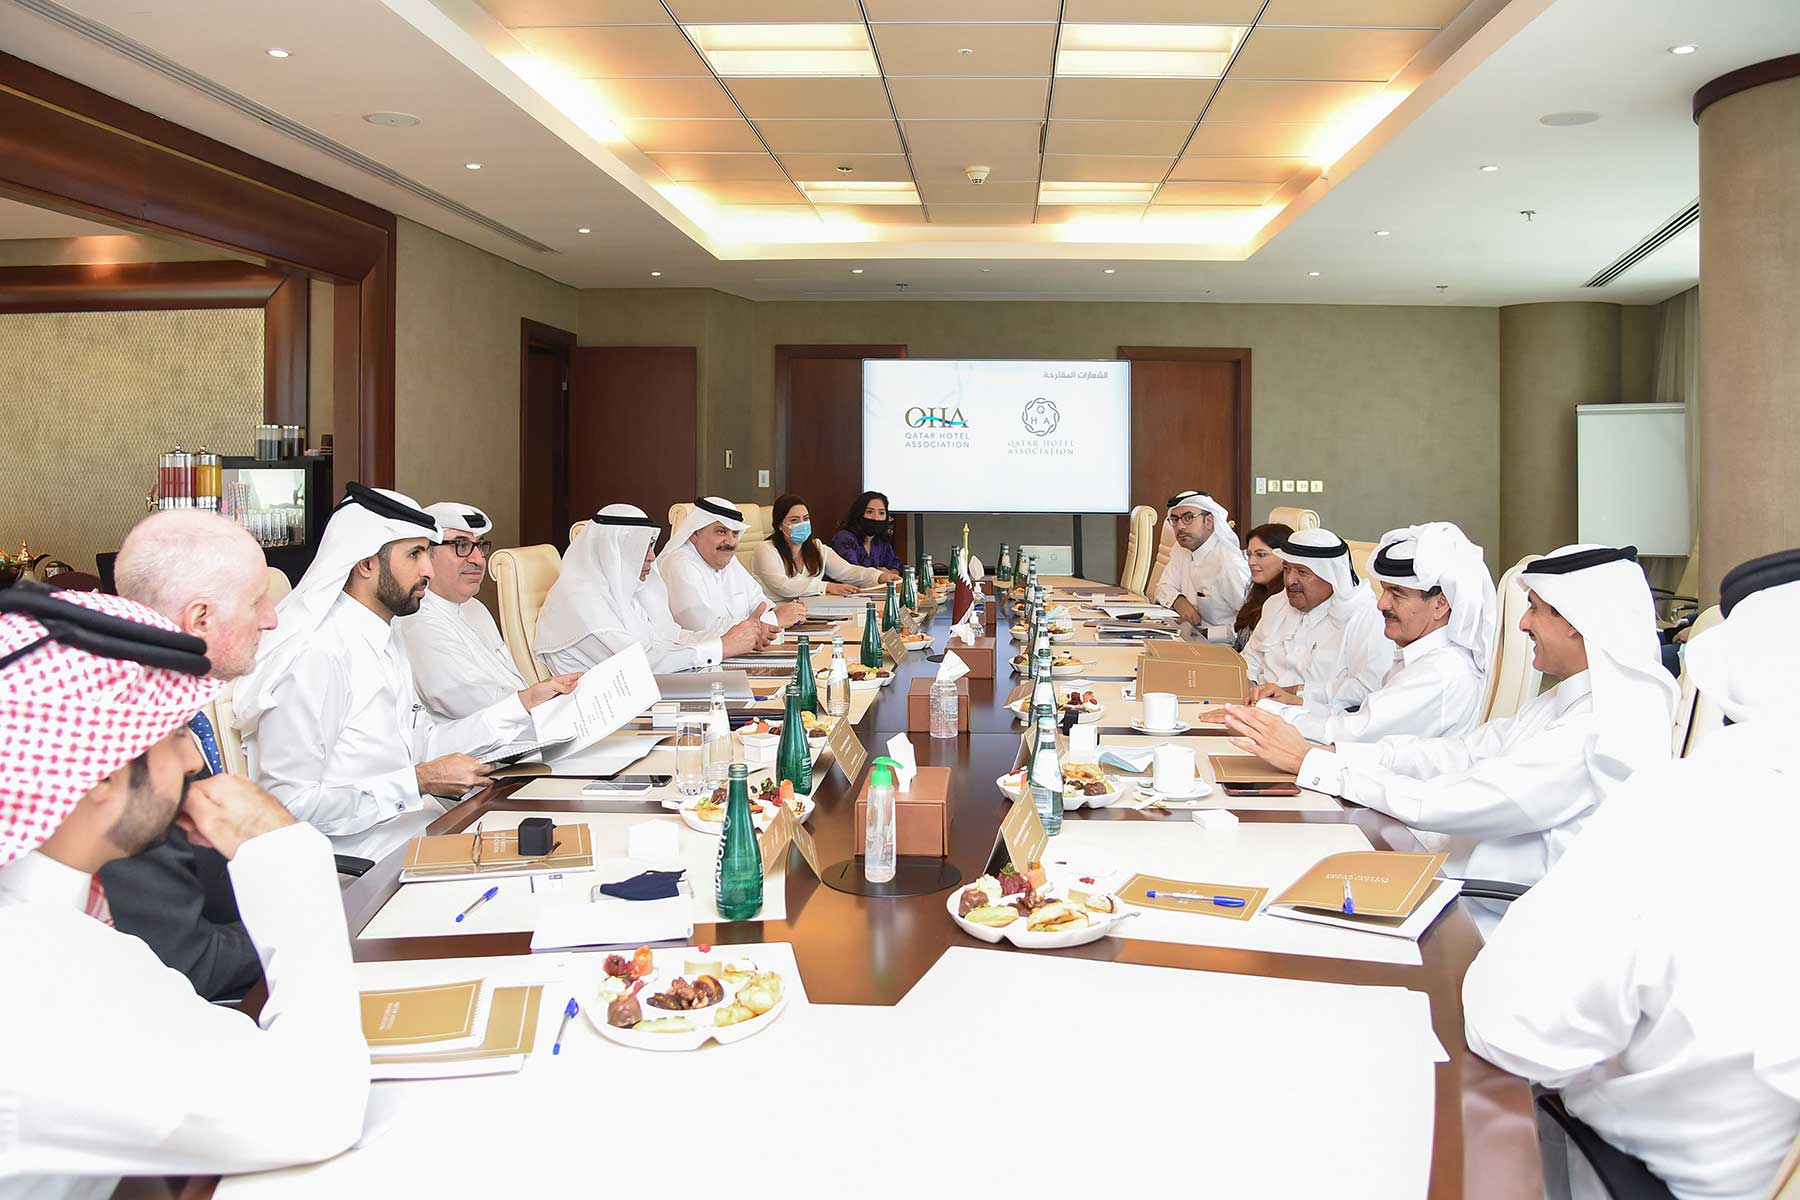 The launch of “Qatar Hotels Association” under the umbrella of QBA, and holding its first inaugural meeting at the headquarters of the Qatari Businessmen Association